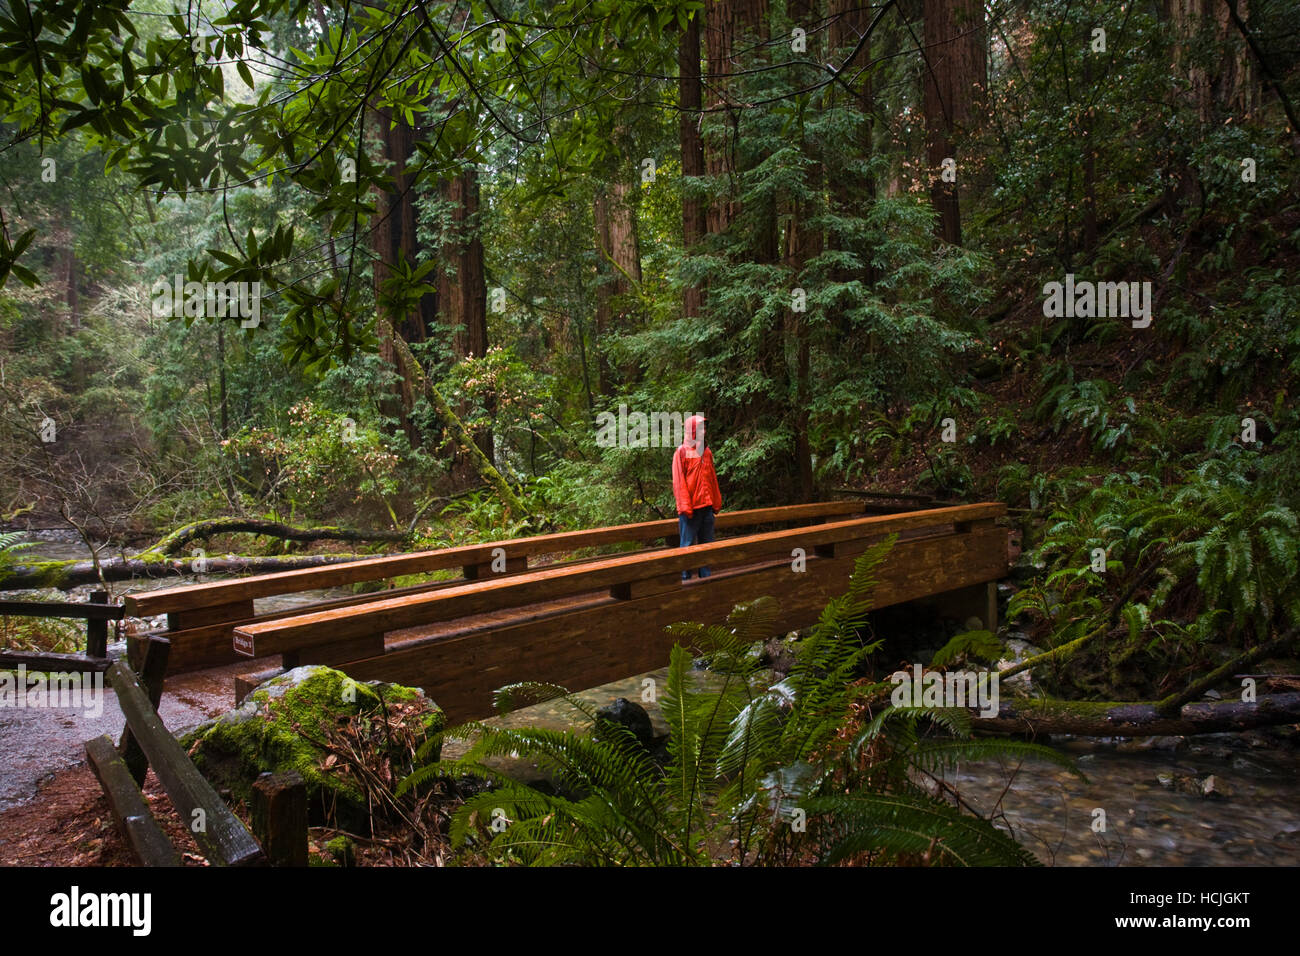 Hiker Zach Podell-Eberhardt stands on a footbridge contemplating the forest on a rainy day in Muir Woods National Monument, California. Stock Photo